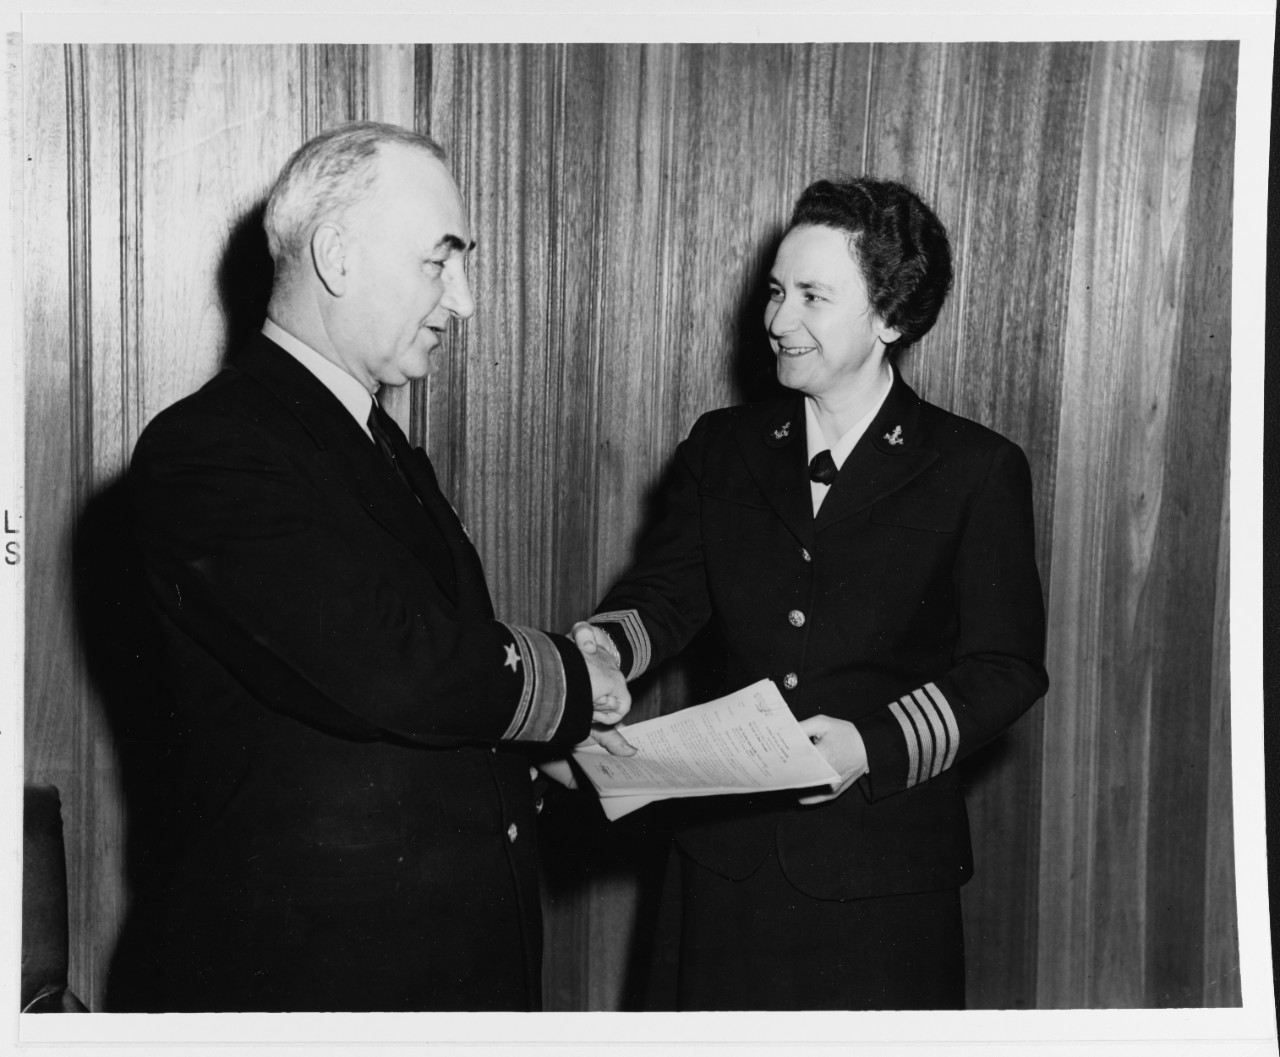 Photo #: 80-G-43752  Captain Mildred H. McAfee, USNR, Director of the Navy's Women's Reserve (right)  